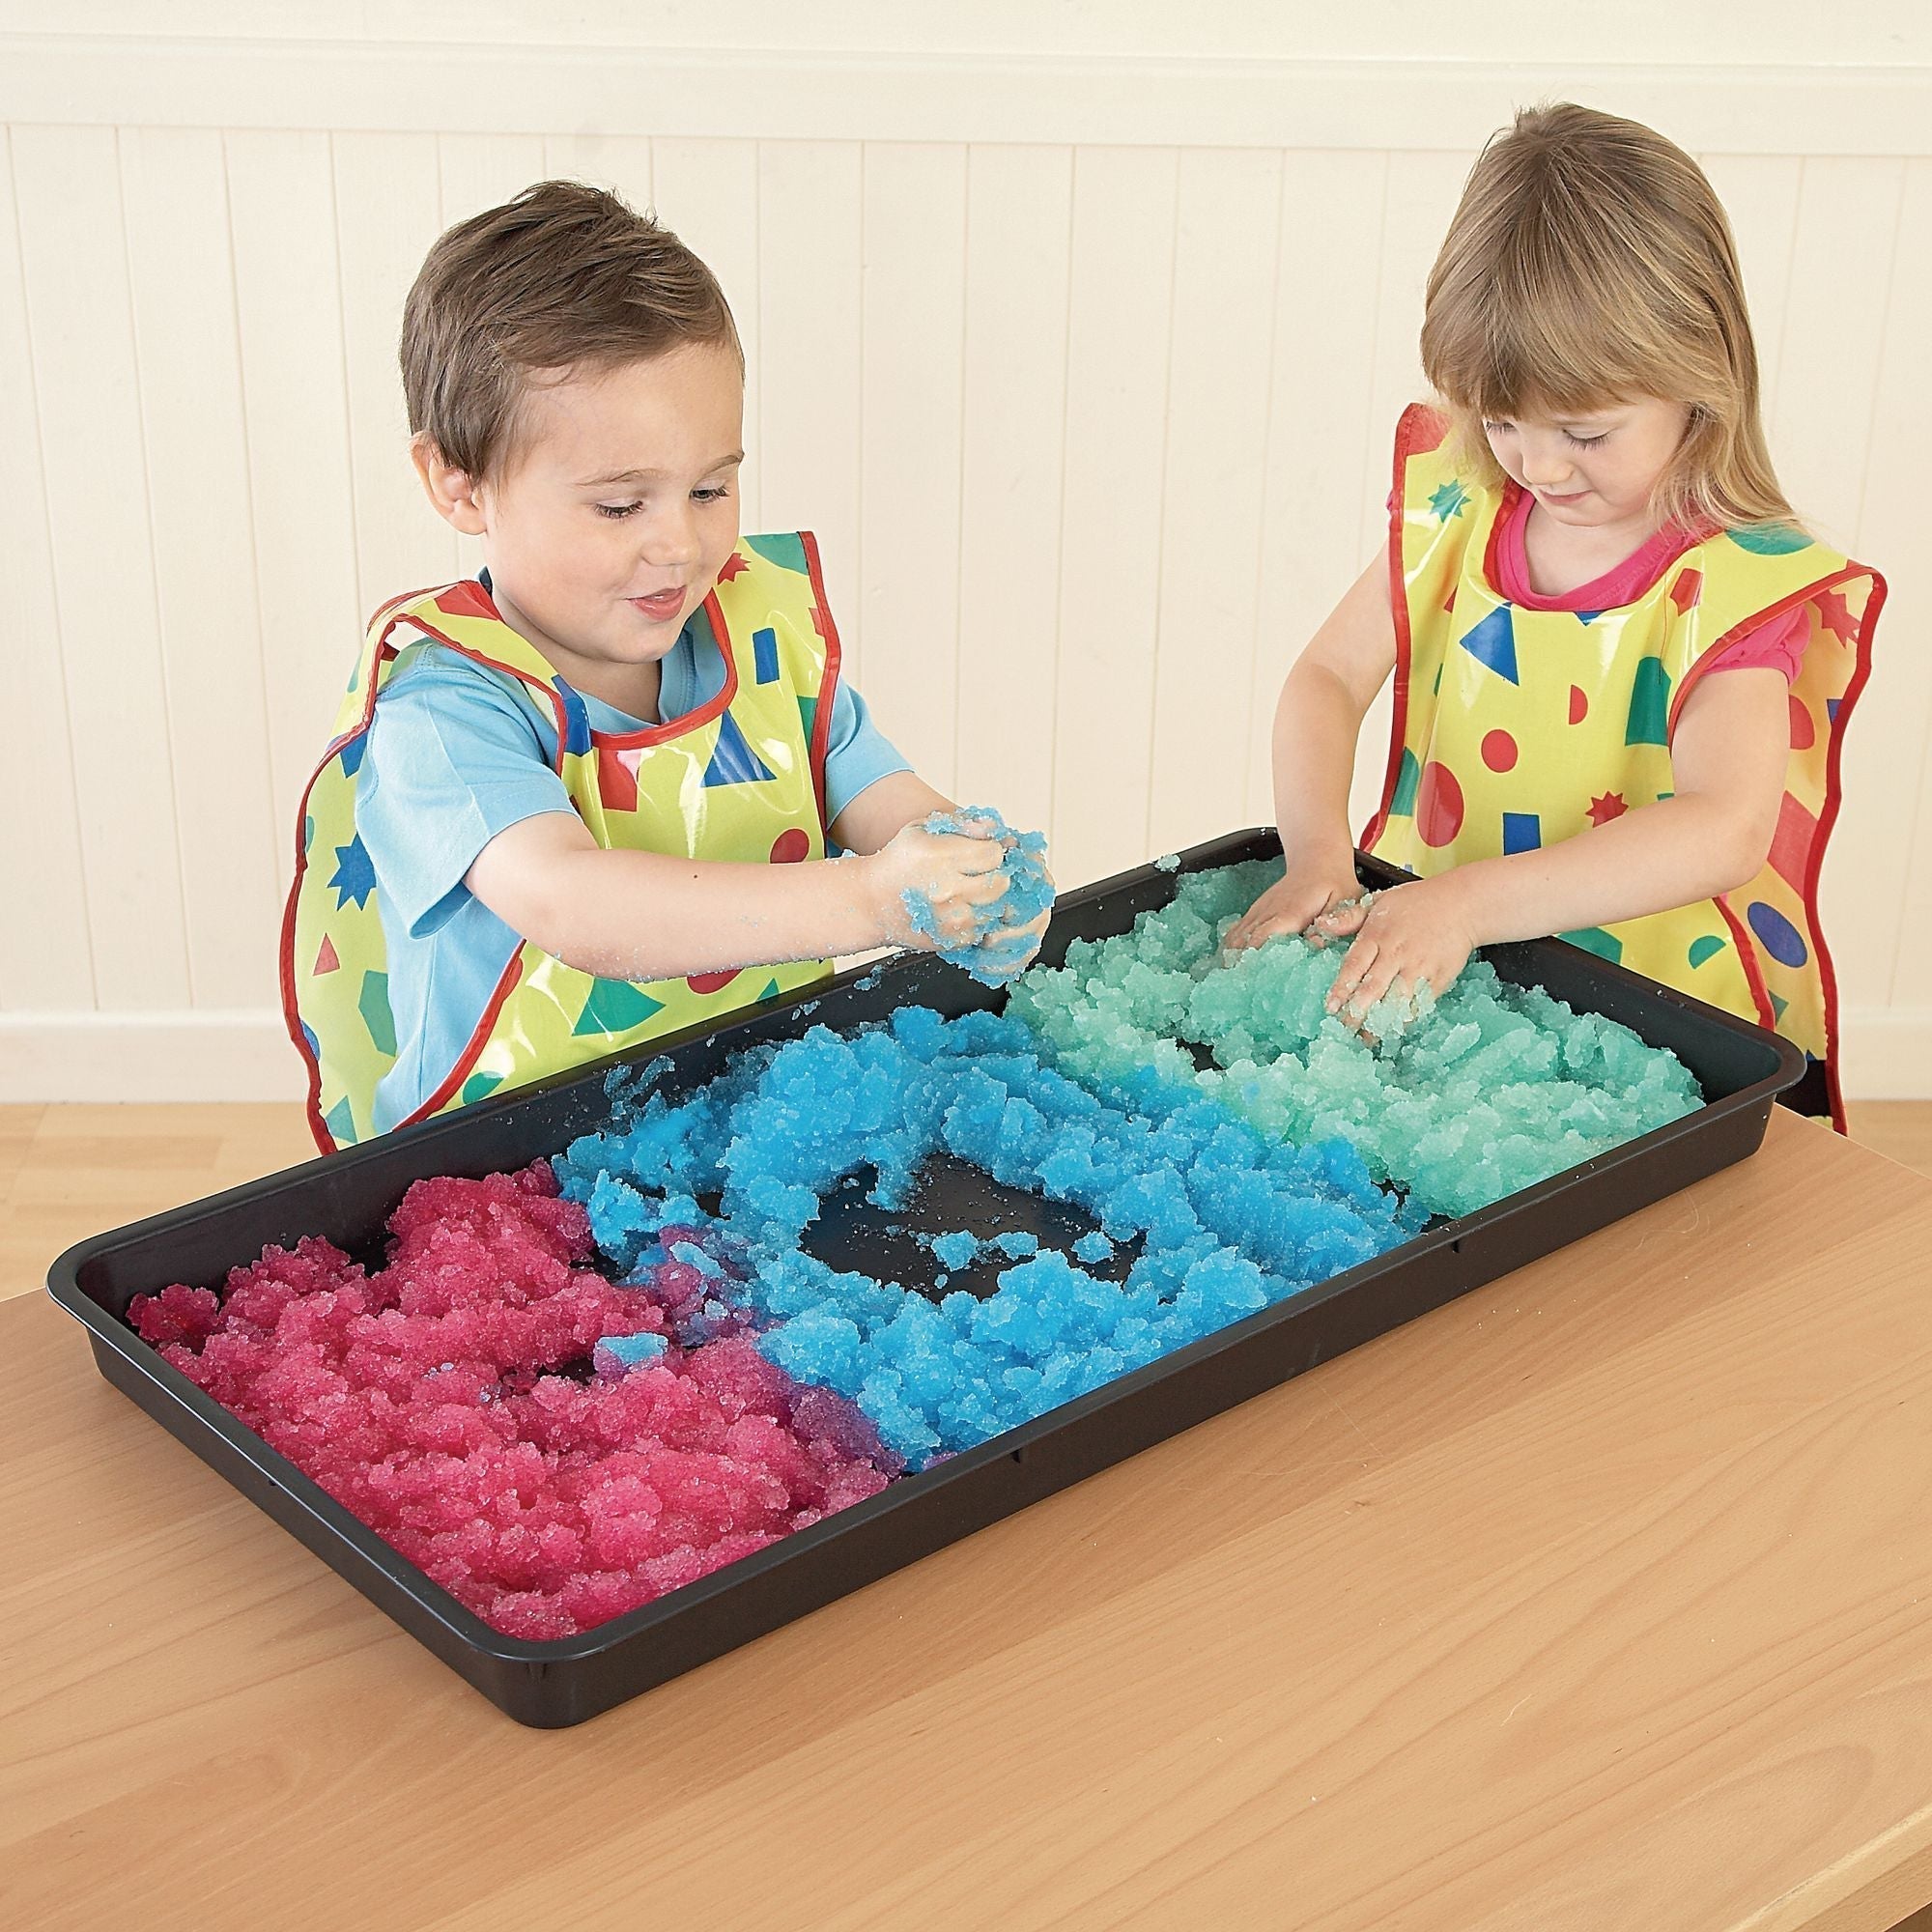 Jumbo Tray Rectangle, Meet your newest educational and recreational ally: the Versatile Sensory Tray. Crafted from durable rectangular plastic, this multi-purpose tray is the ideal companion for all types of messy play, be it indoors or outdoors. Its optimally-sized design makes it a perfect fit for table tops and low storage spaces, ensuring it's always close at hand for spontaneous fun. From channeling water to creating a makeshift sandpit or even an outdoor painting station, the potential activities are 